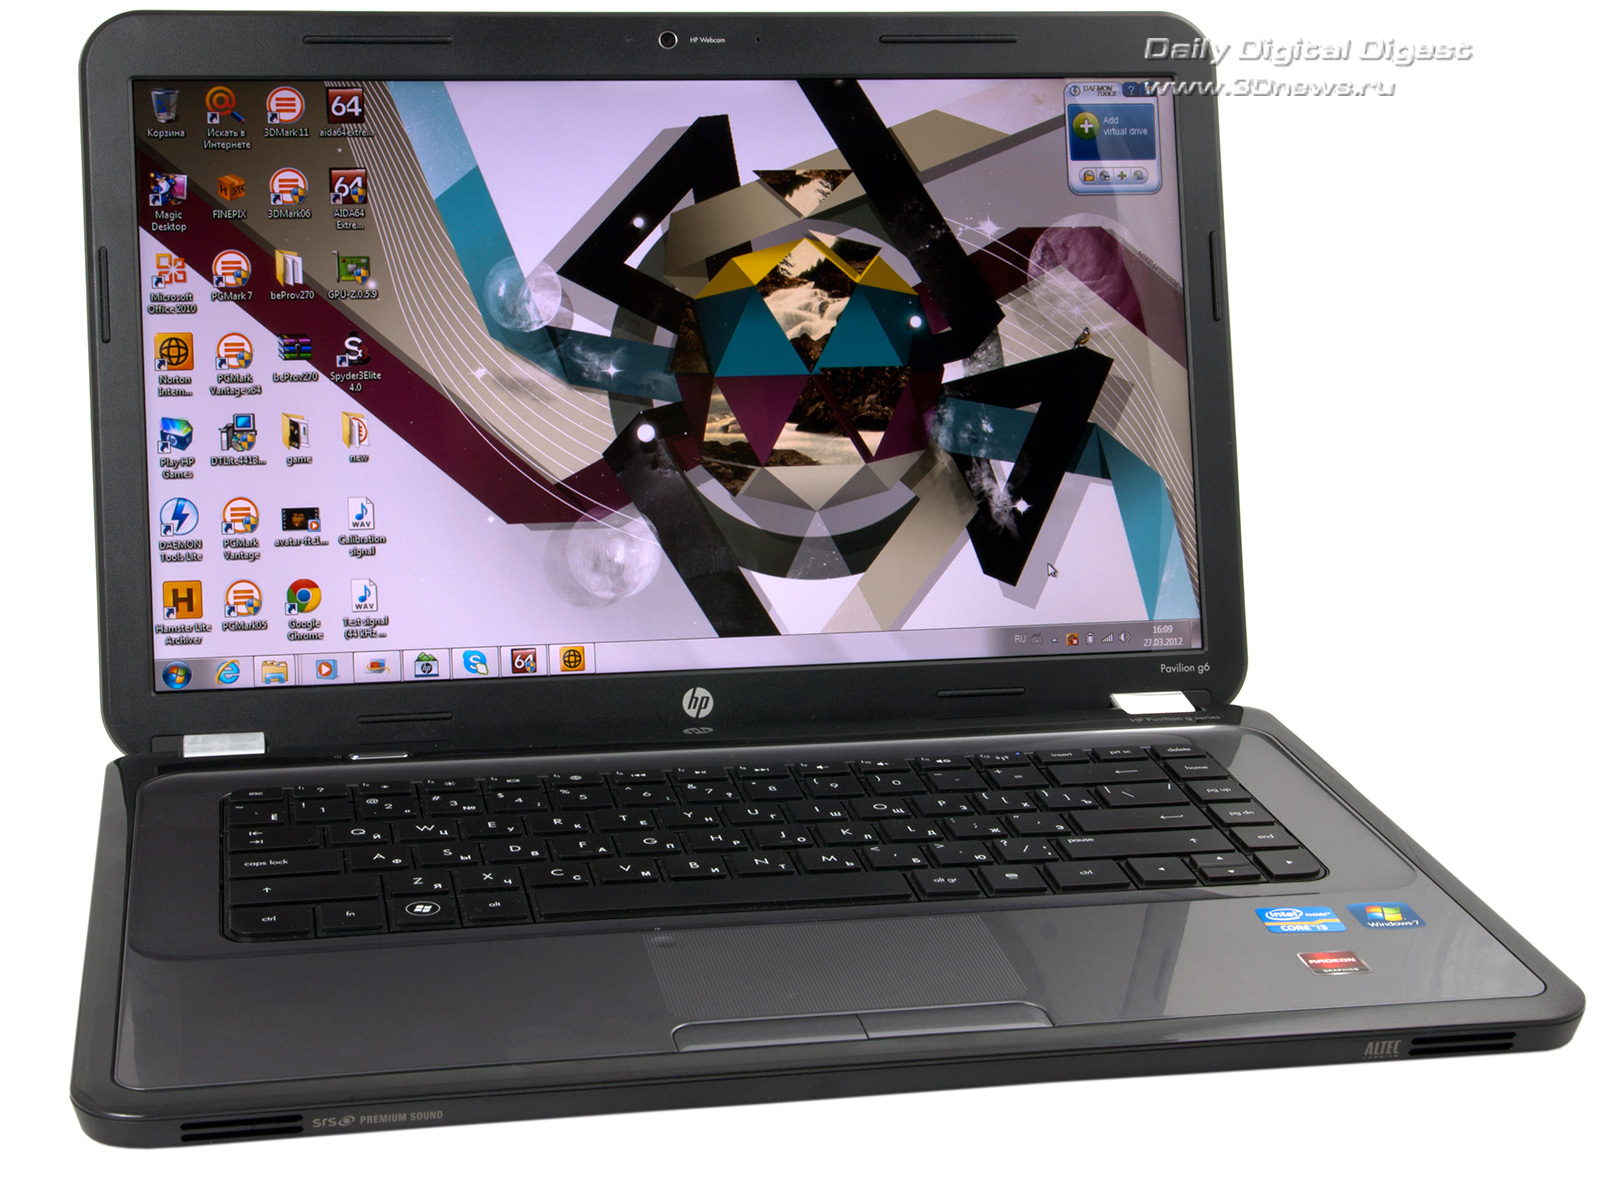 Hp pavilion g6 notebook pc drivers for windows 7